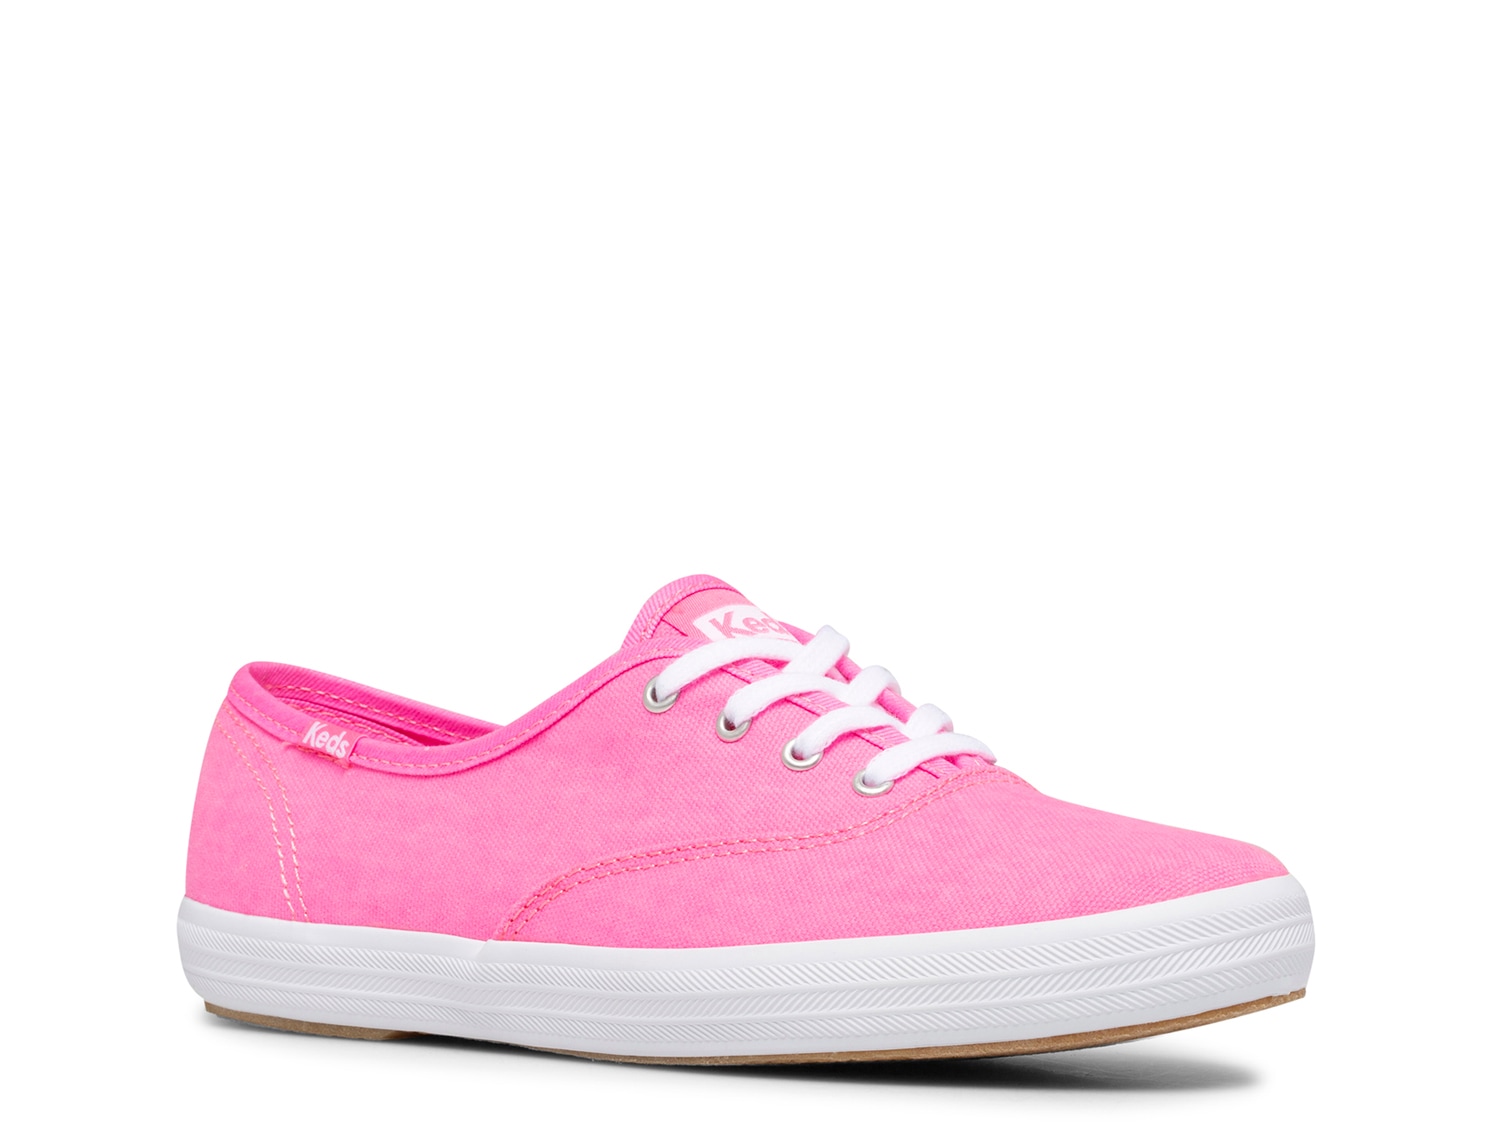 Keds Champion Sneaker - Free Shipping | DSW